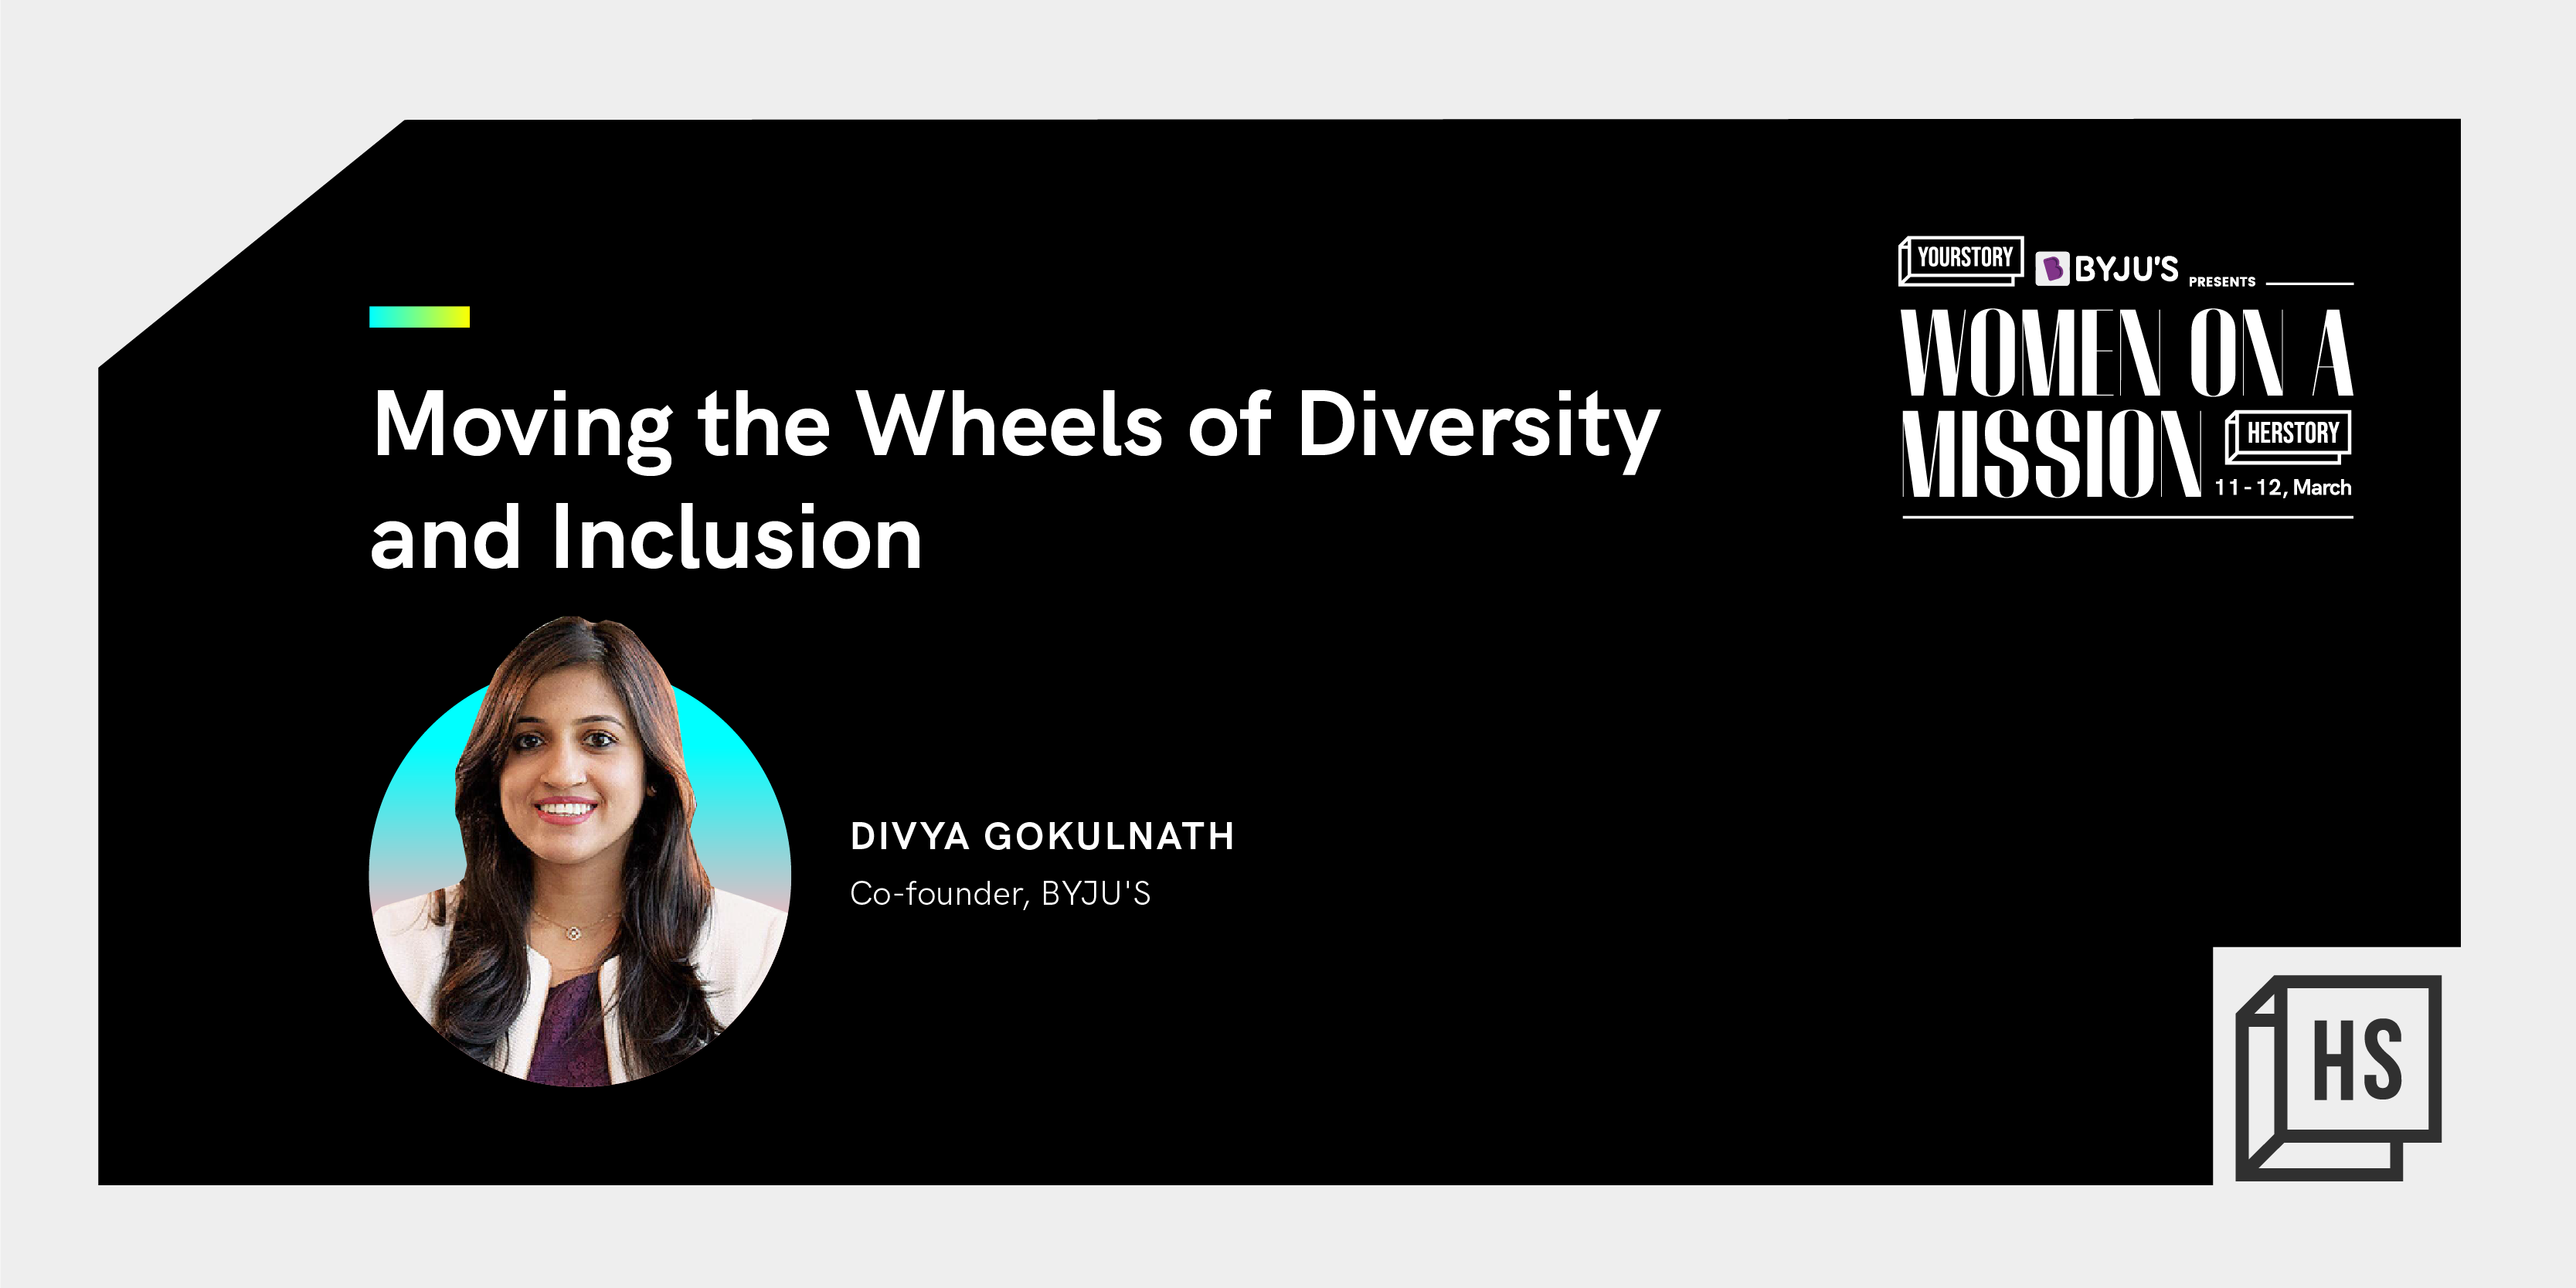 Divya Gokulnath of BYJU’S on what it will take to make equality the norm 